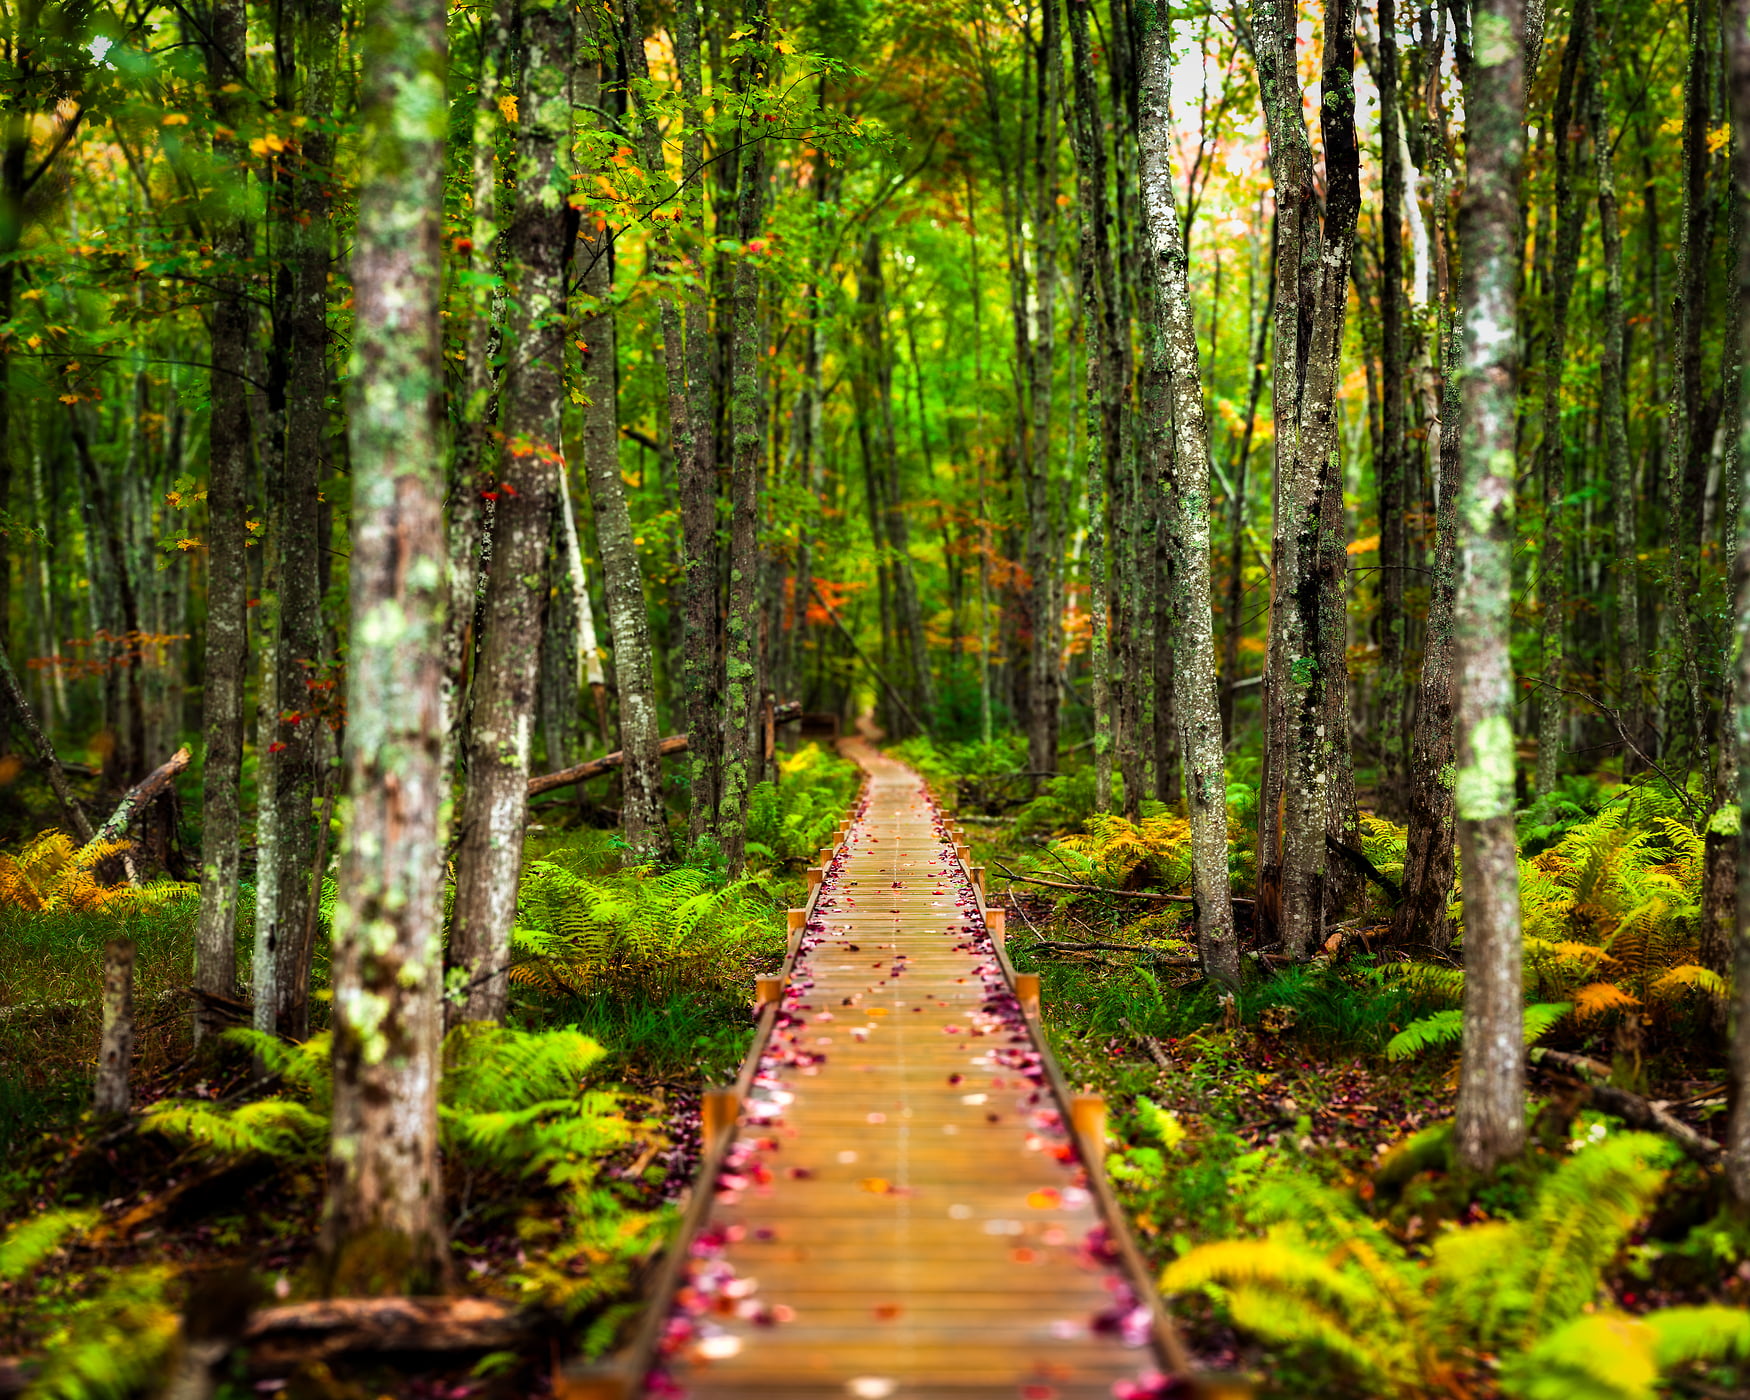 191 megapixels! A very high resolution, large-format VAST photo of leaves on a boardwalk in a forest in nature; fine art photograph created by Aaron Priest in Acadia National Park, Maine